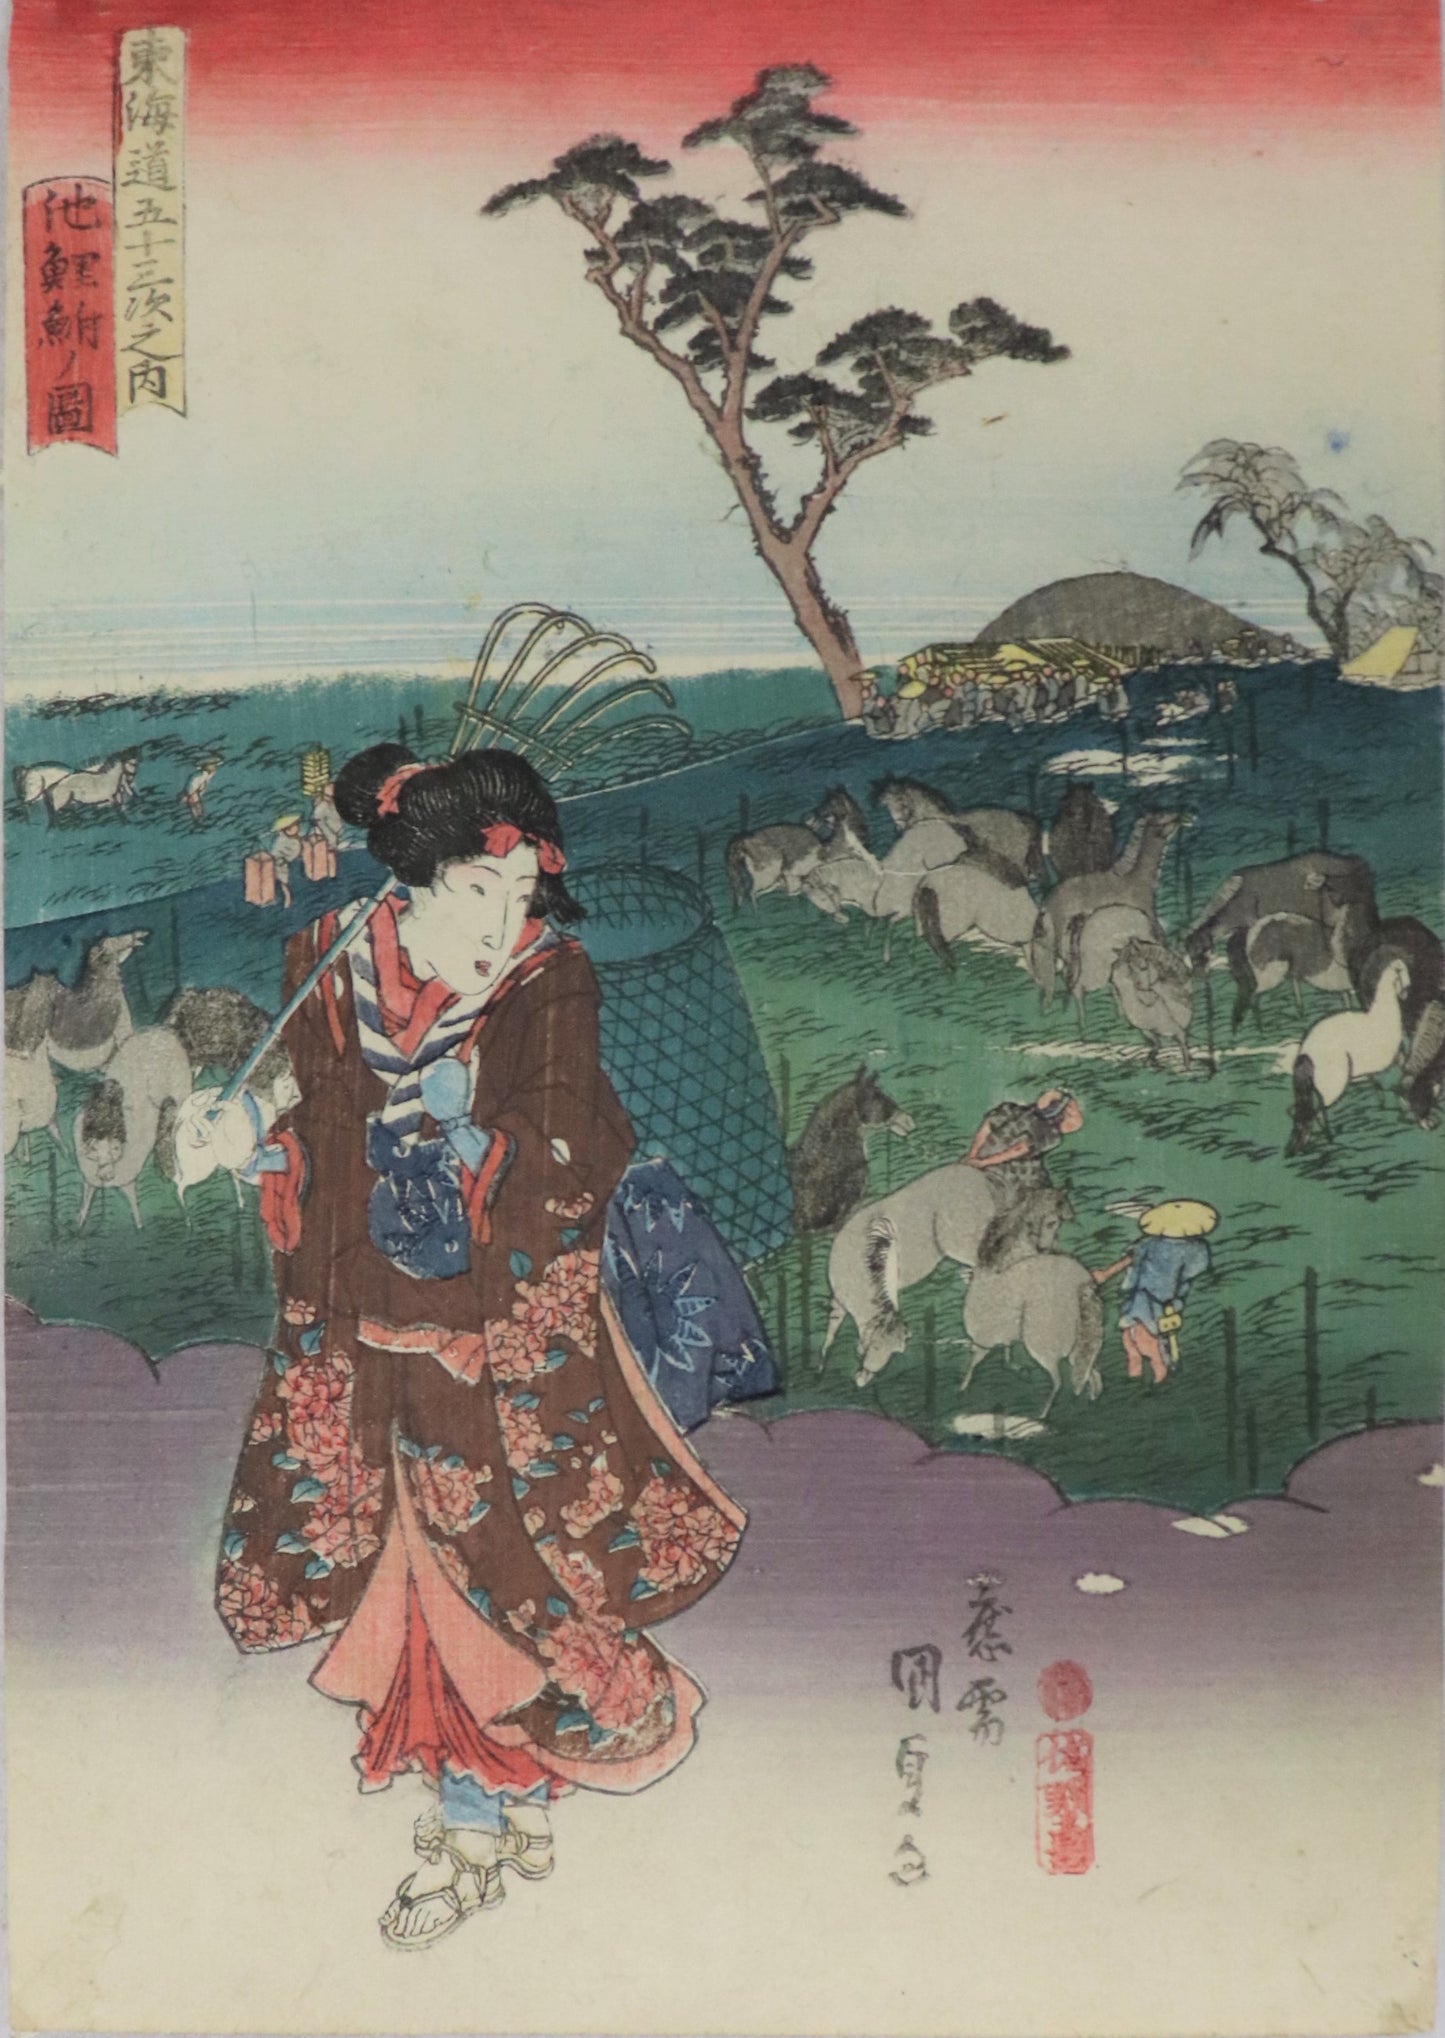 Chiryu from the series " 53 Stations of the Tokaido Road "by Kunisada / Chiryu de la série des "53 Stations de la route du Tokaido" par Kunisada (1838)